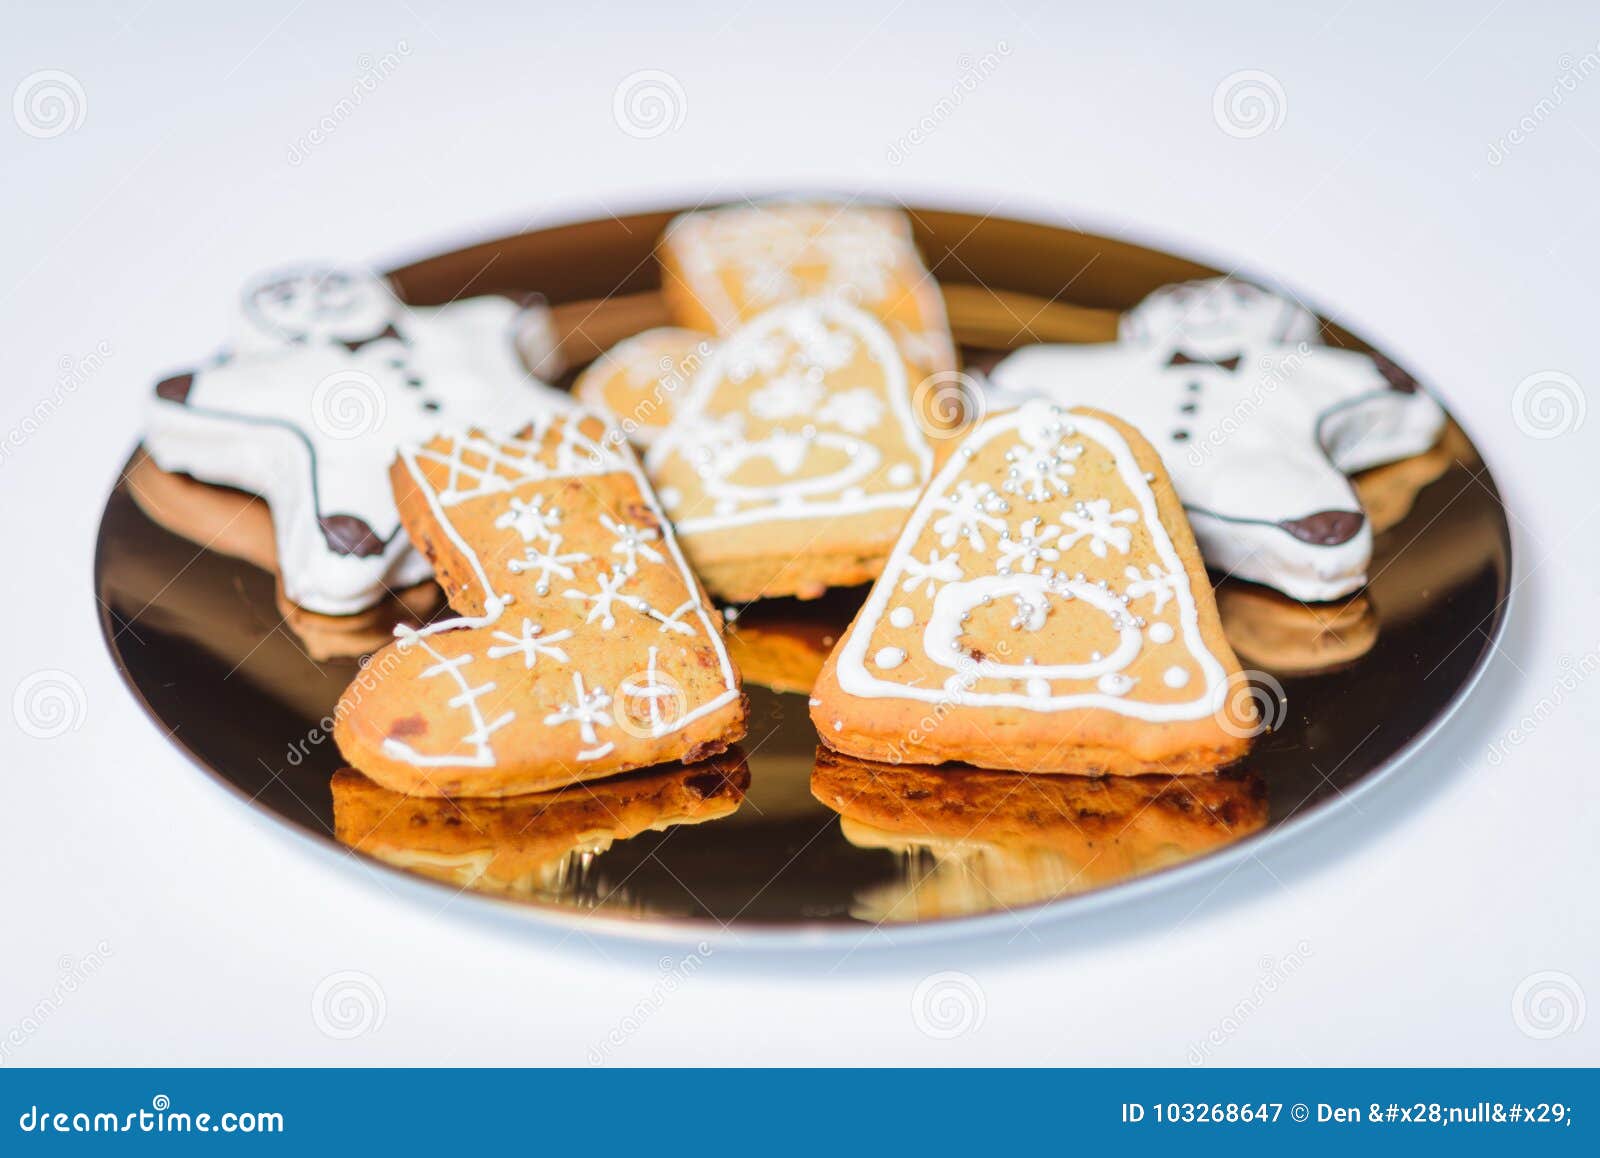 Christmas Cookies on the Gold Plate Stock Image - Image of home ...